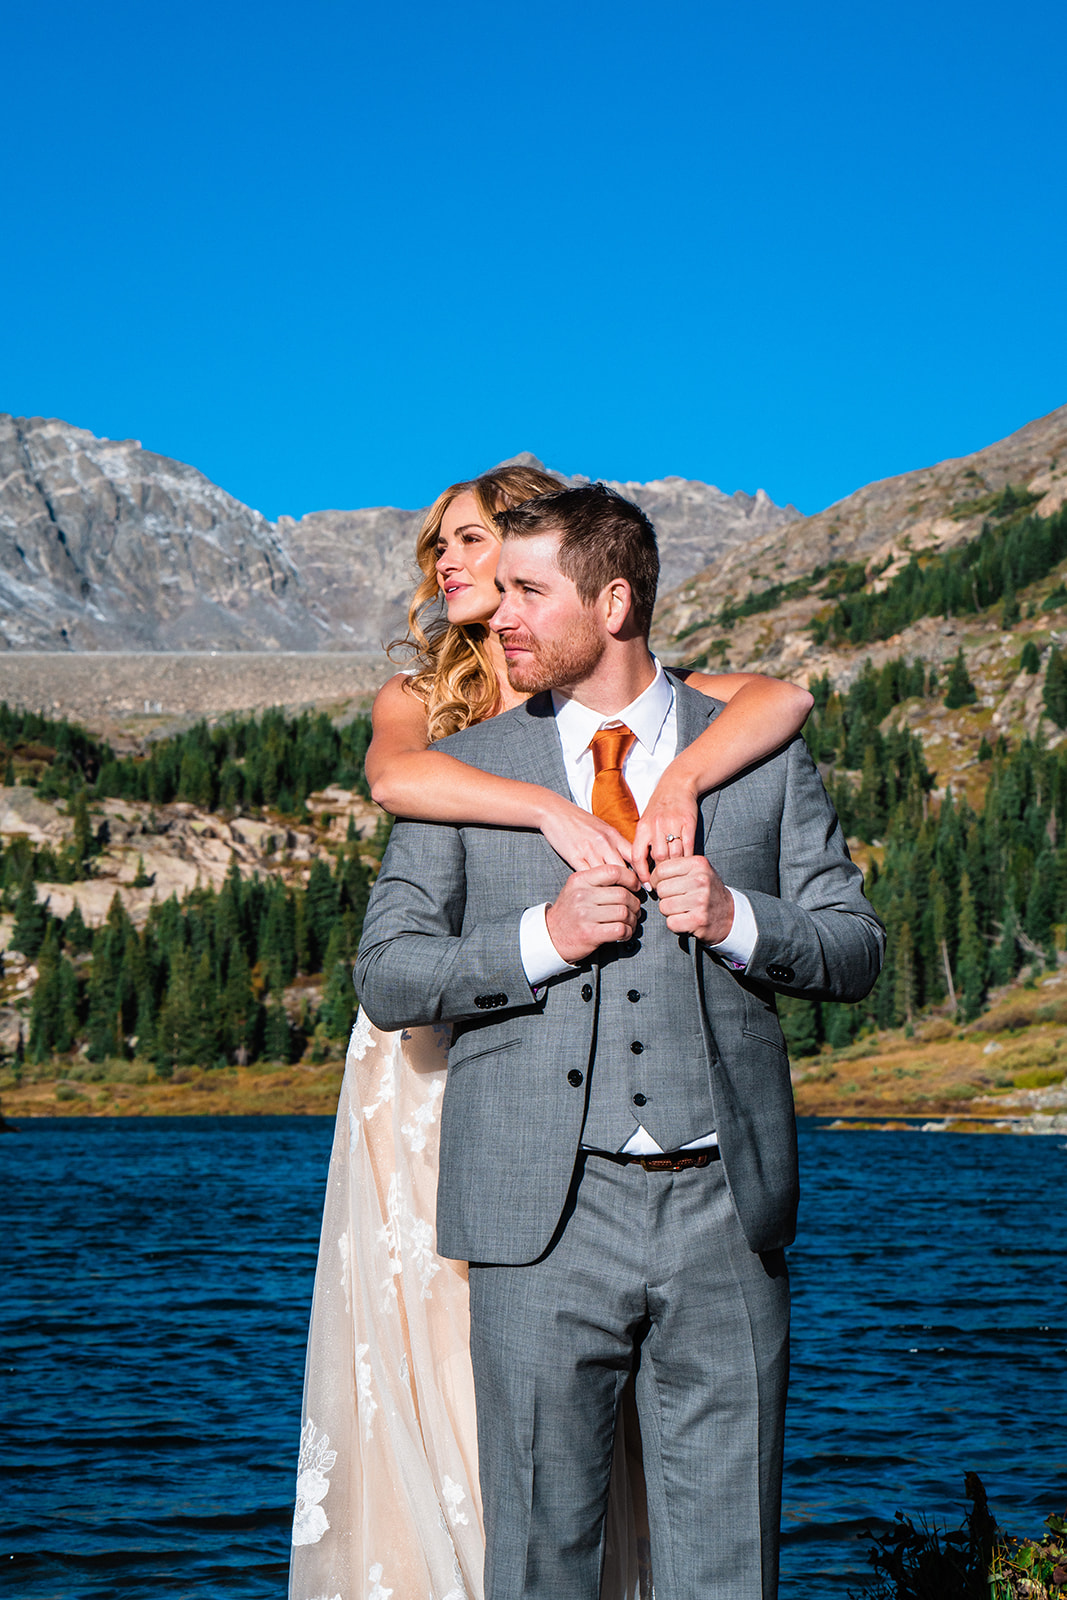 A Romantic Outdoor Colorado Micro Wedding Day at Sapphire Point